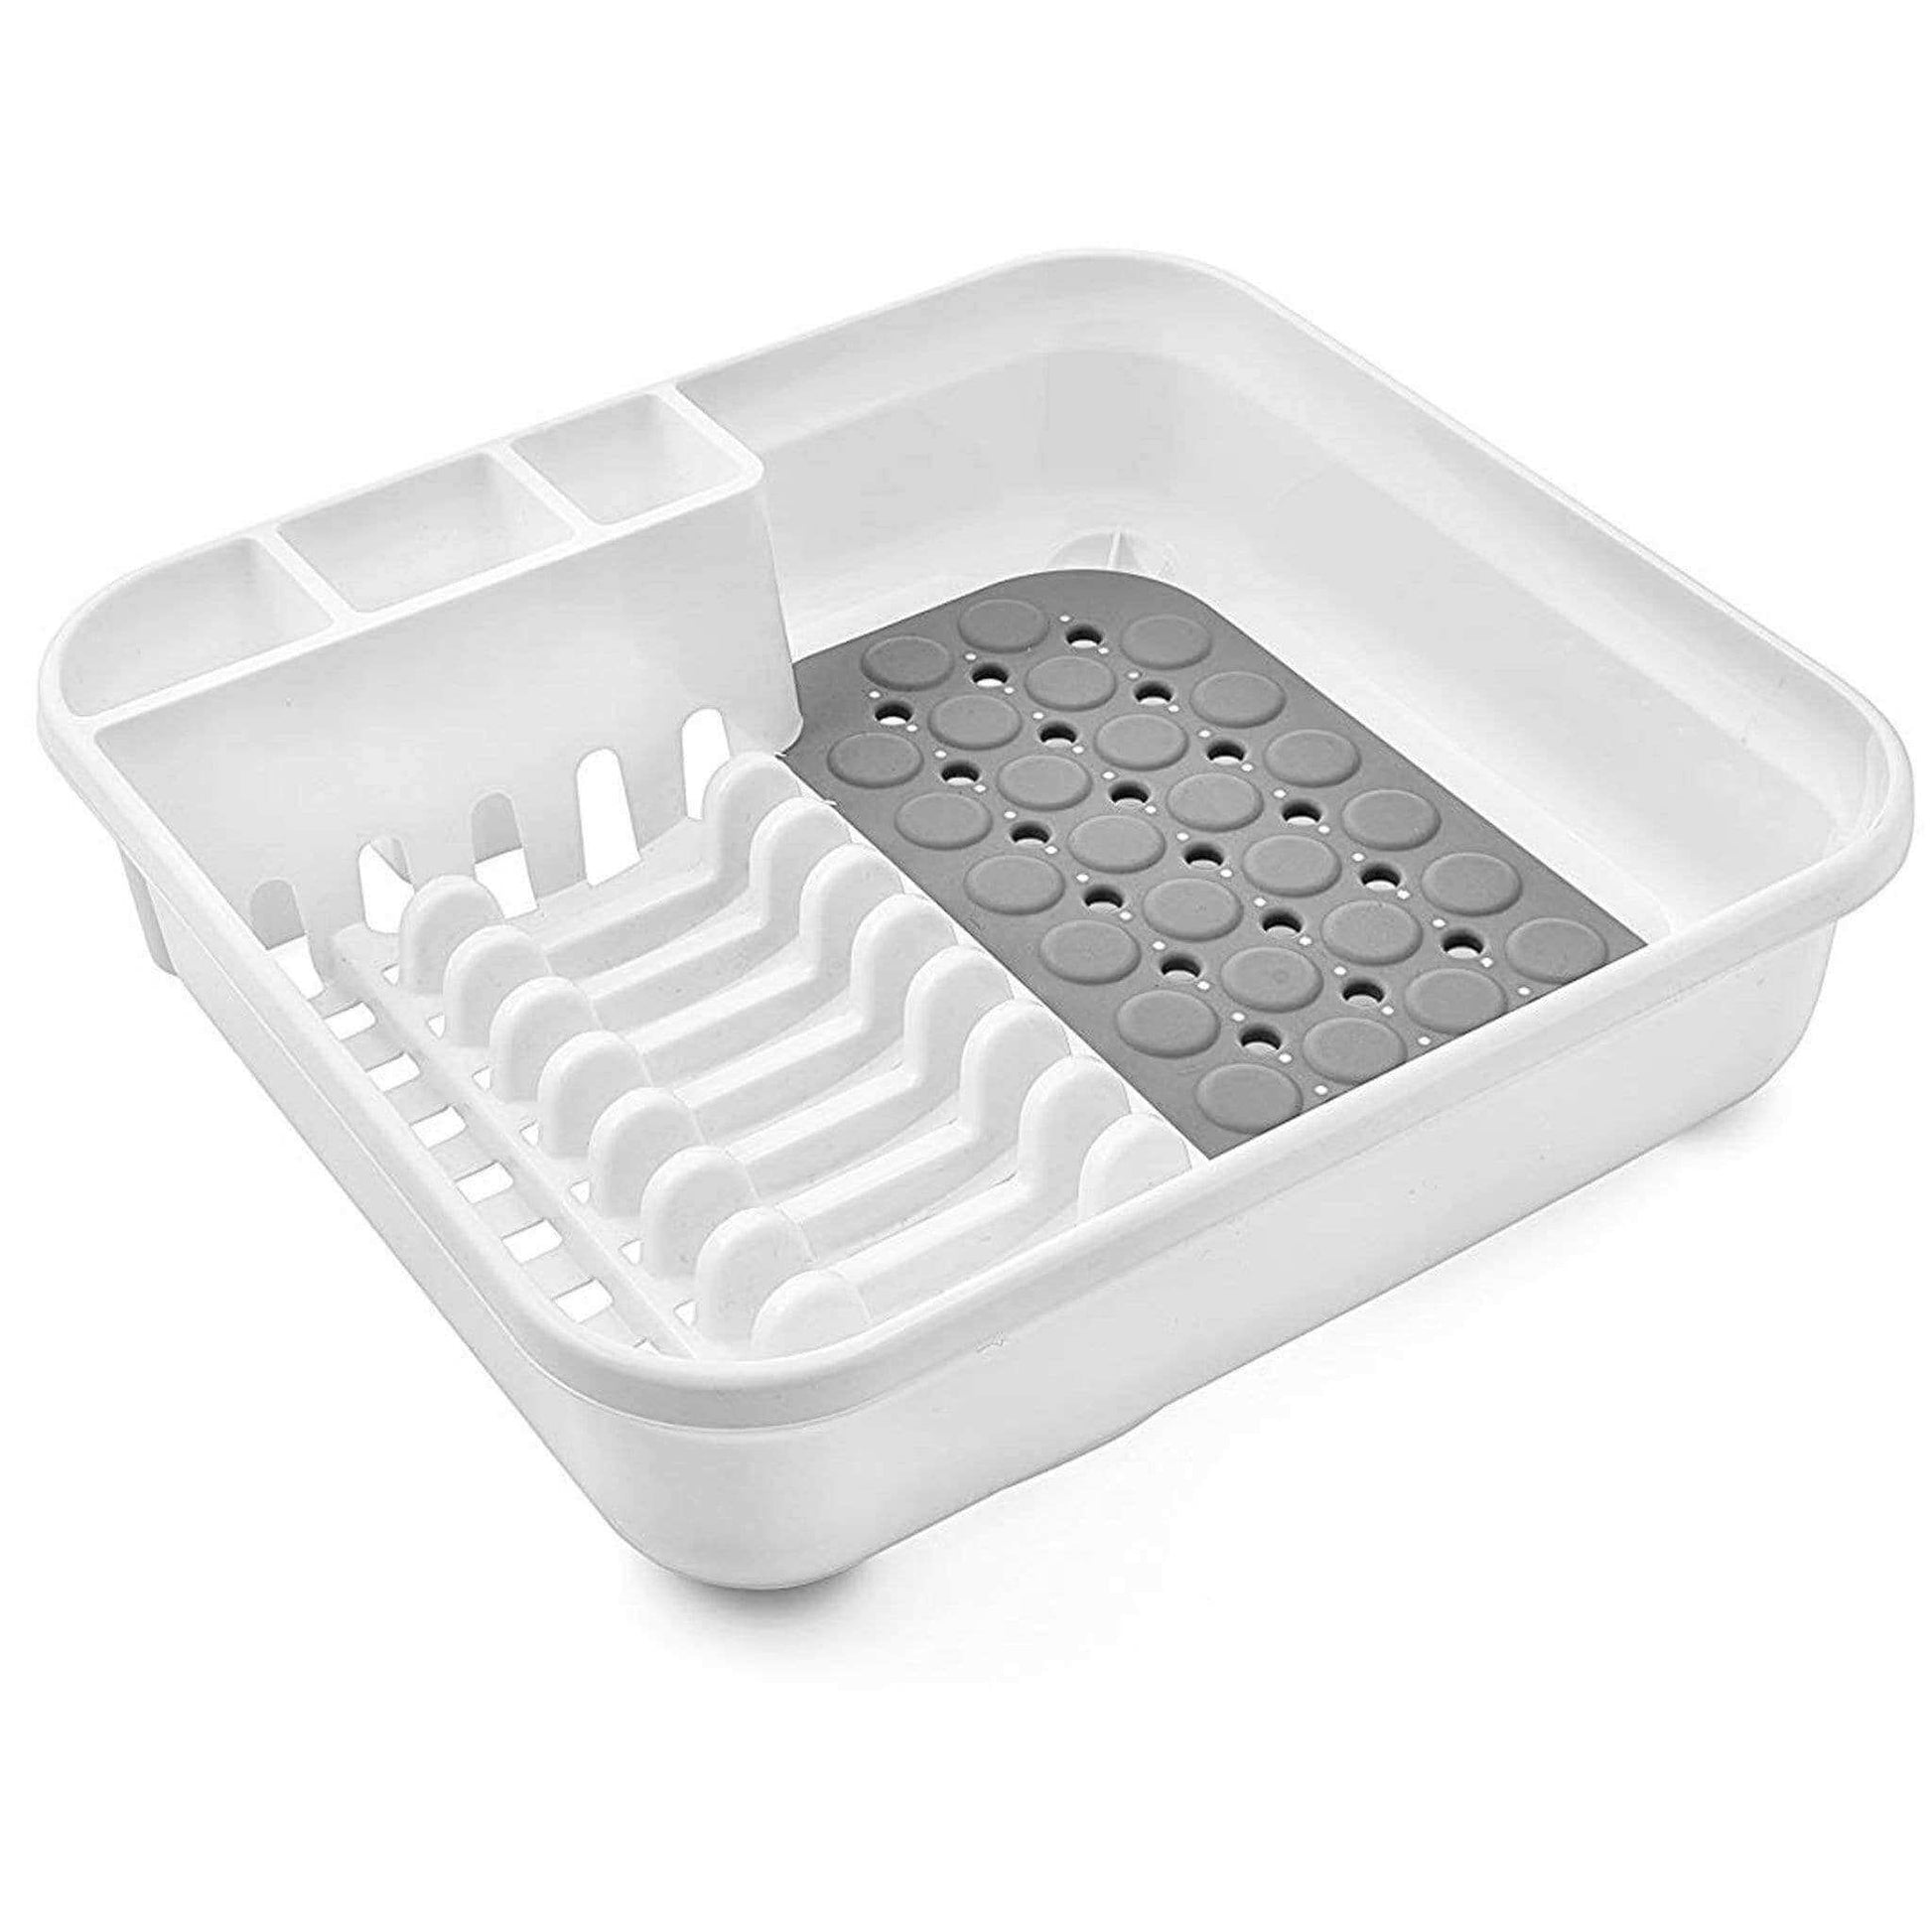 Kitchenware  -  Addis Draining Station In White And Grey  -  50143274